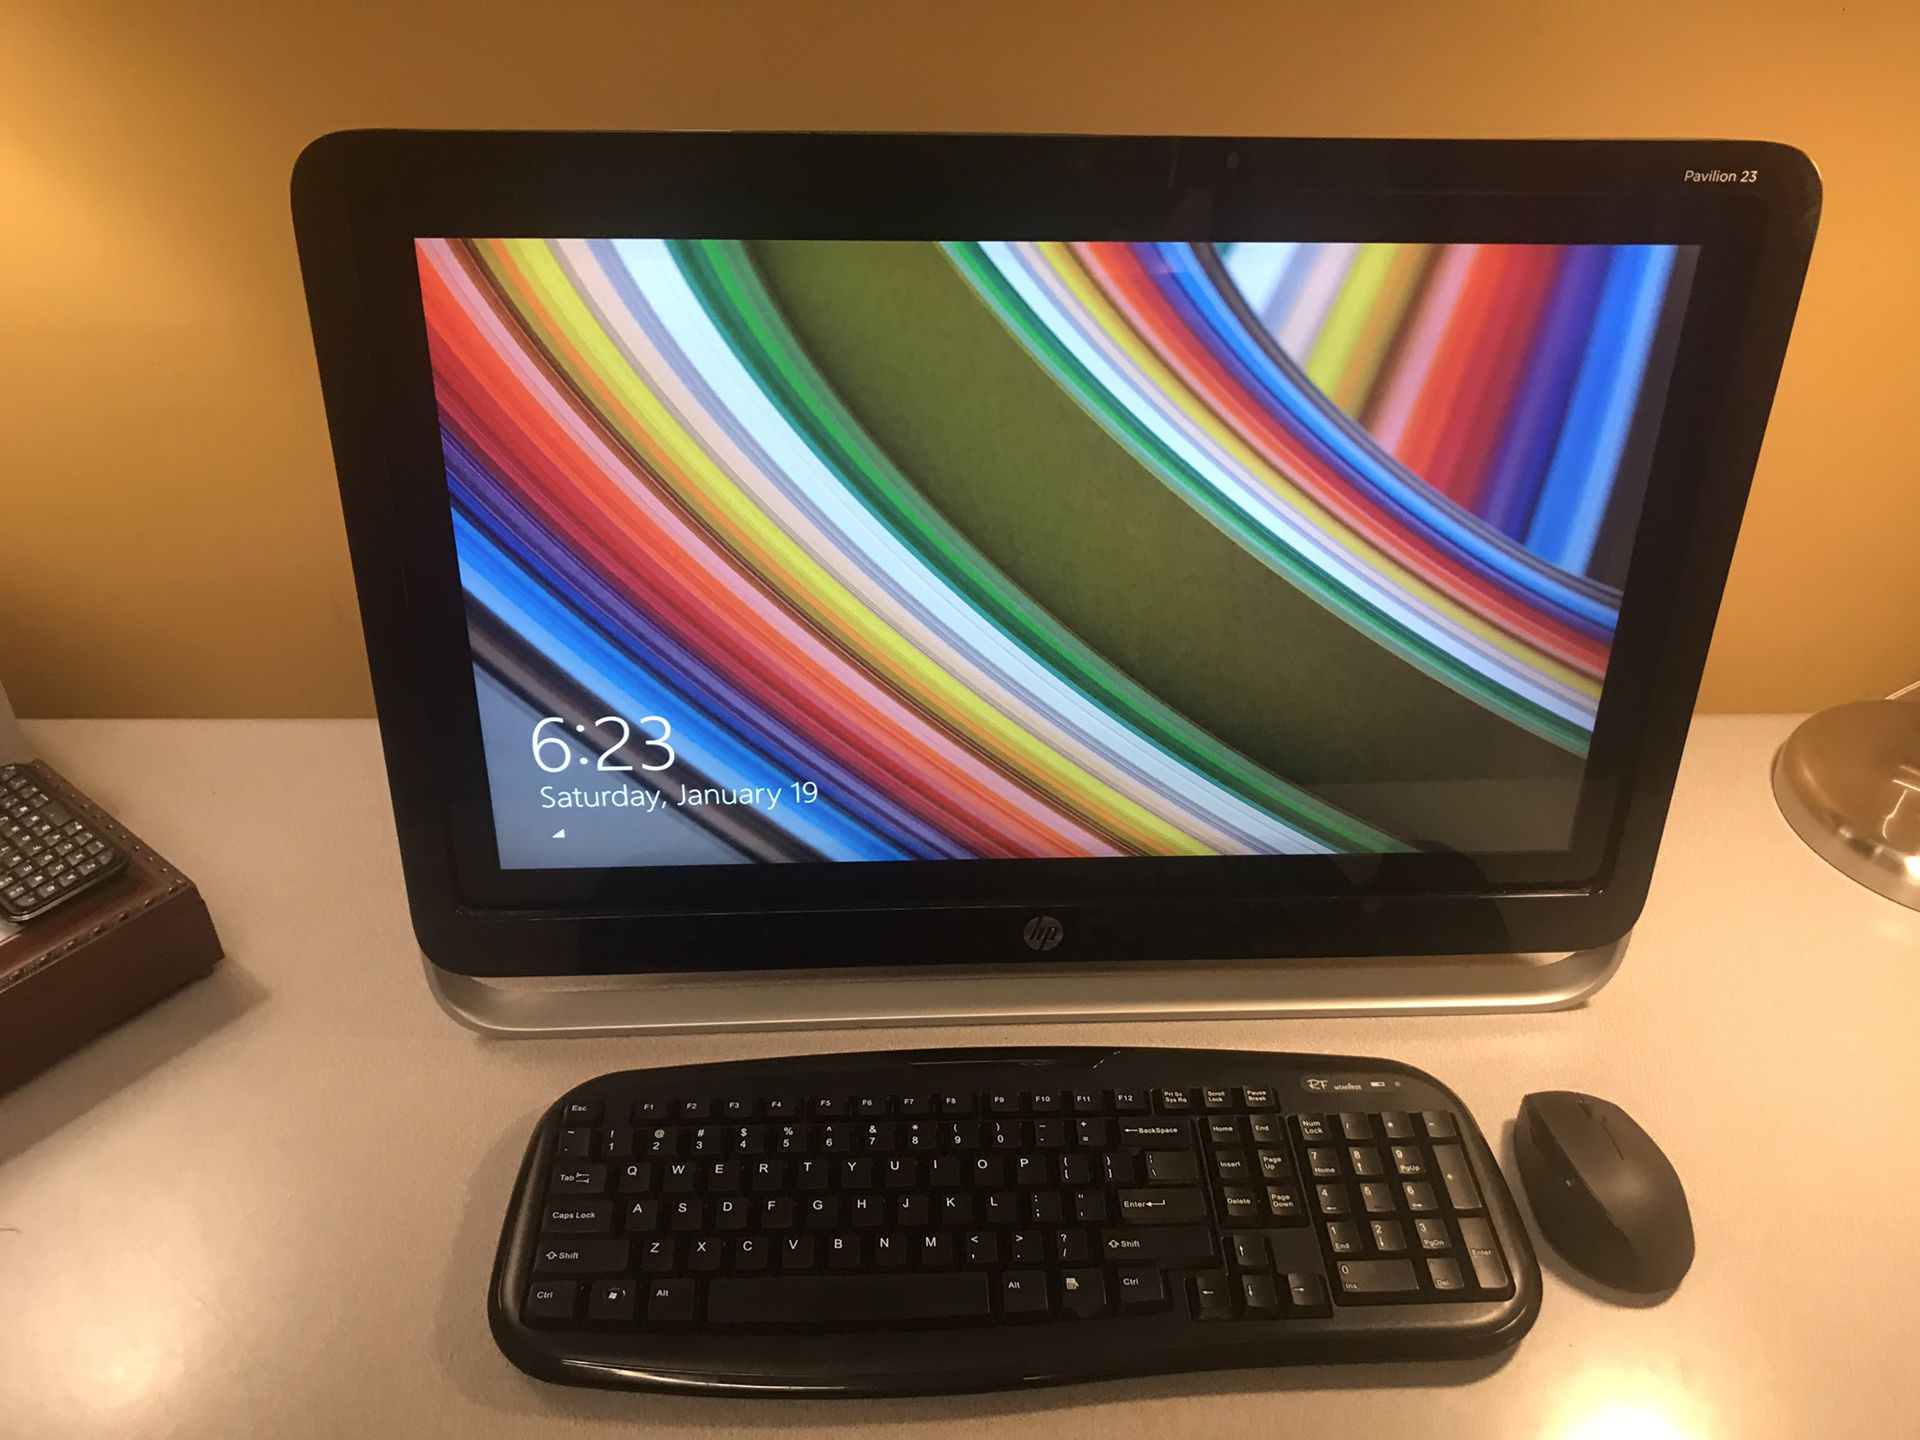 HP pavilion 23 h024 Touchsmart All-in-One Desktop Computer with Wireless Keyboard and Mouse